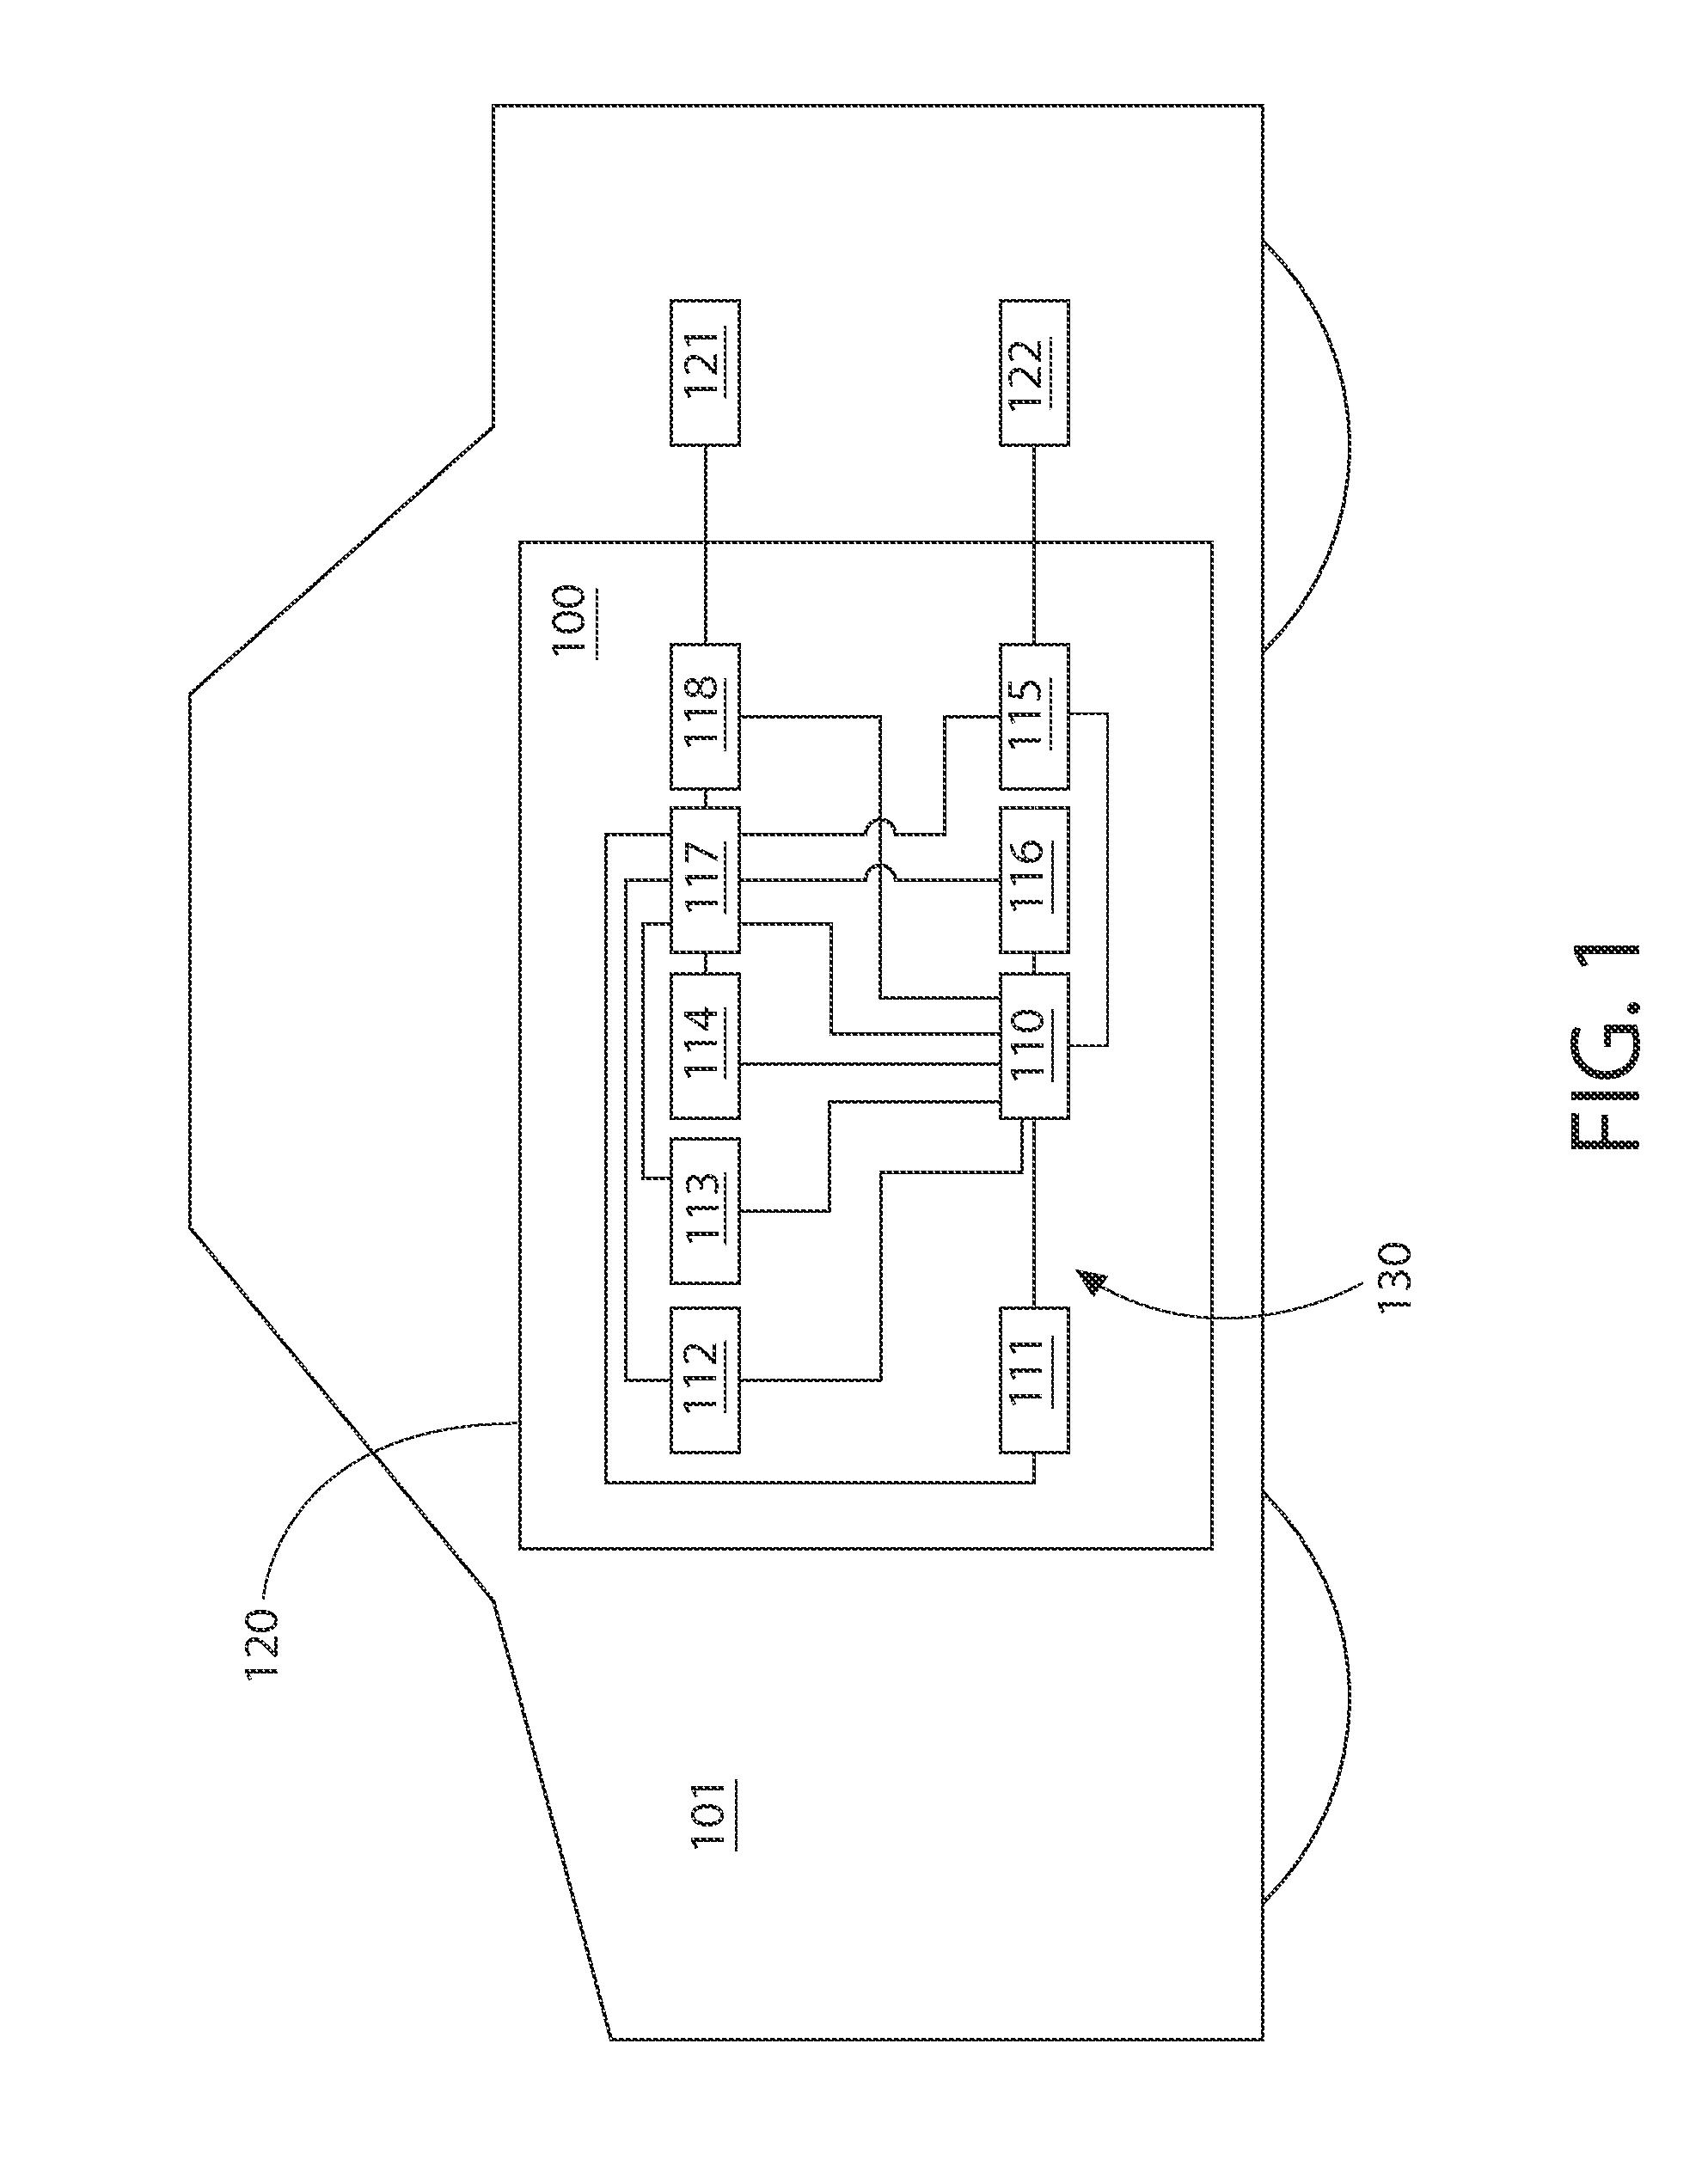 System, method and apparatus for tracking parking behavior of a vehicle